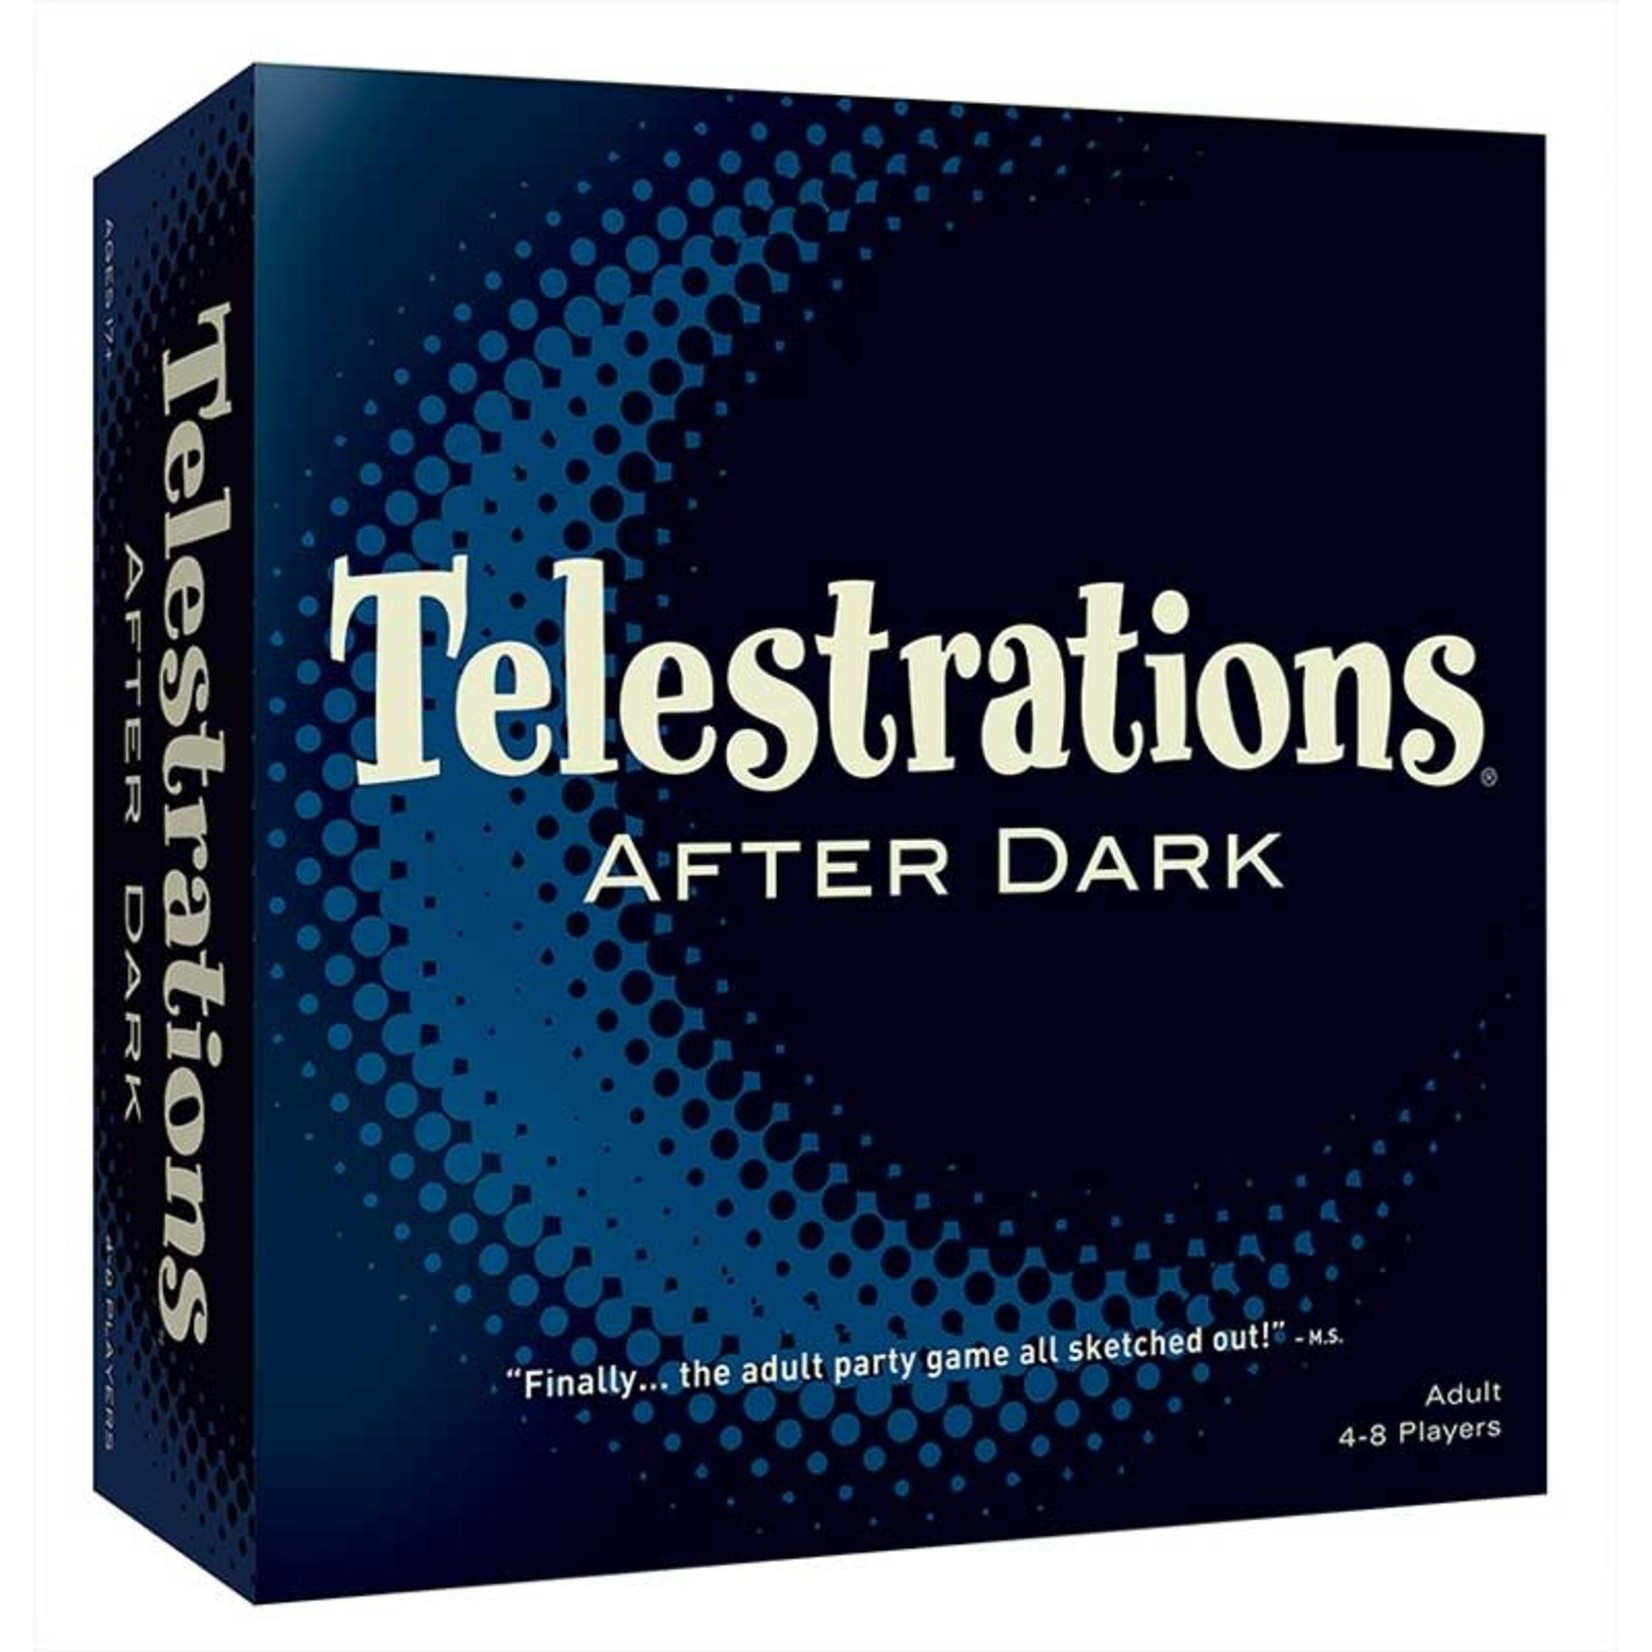 The Op Telestrations: After Dark